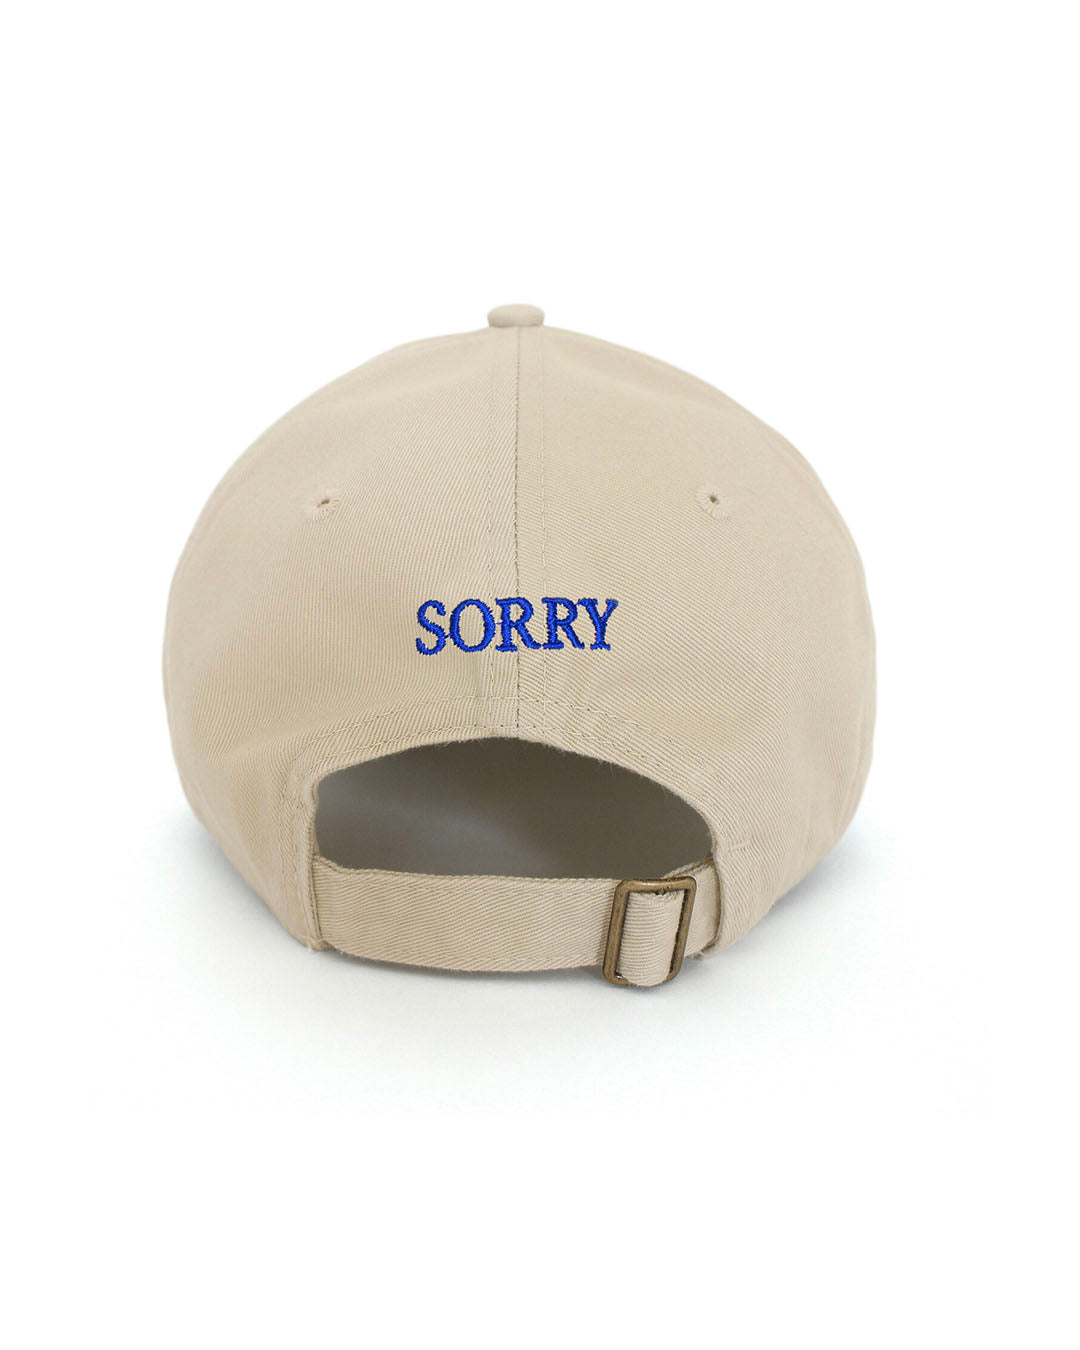 【IDEA】SORRY / I DON’T WORK HERE HAT - BEIGE